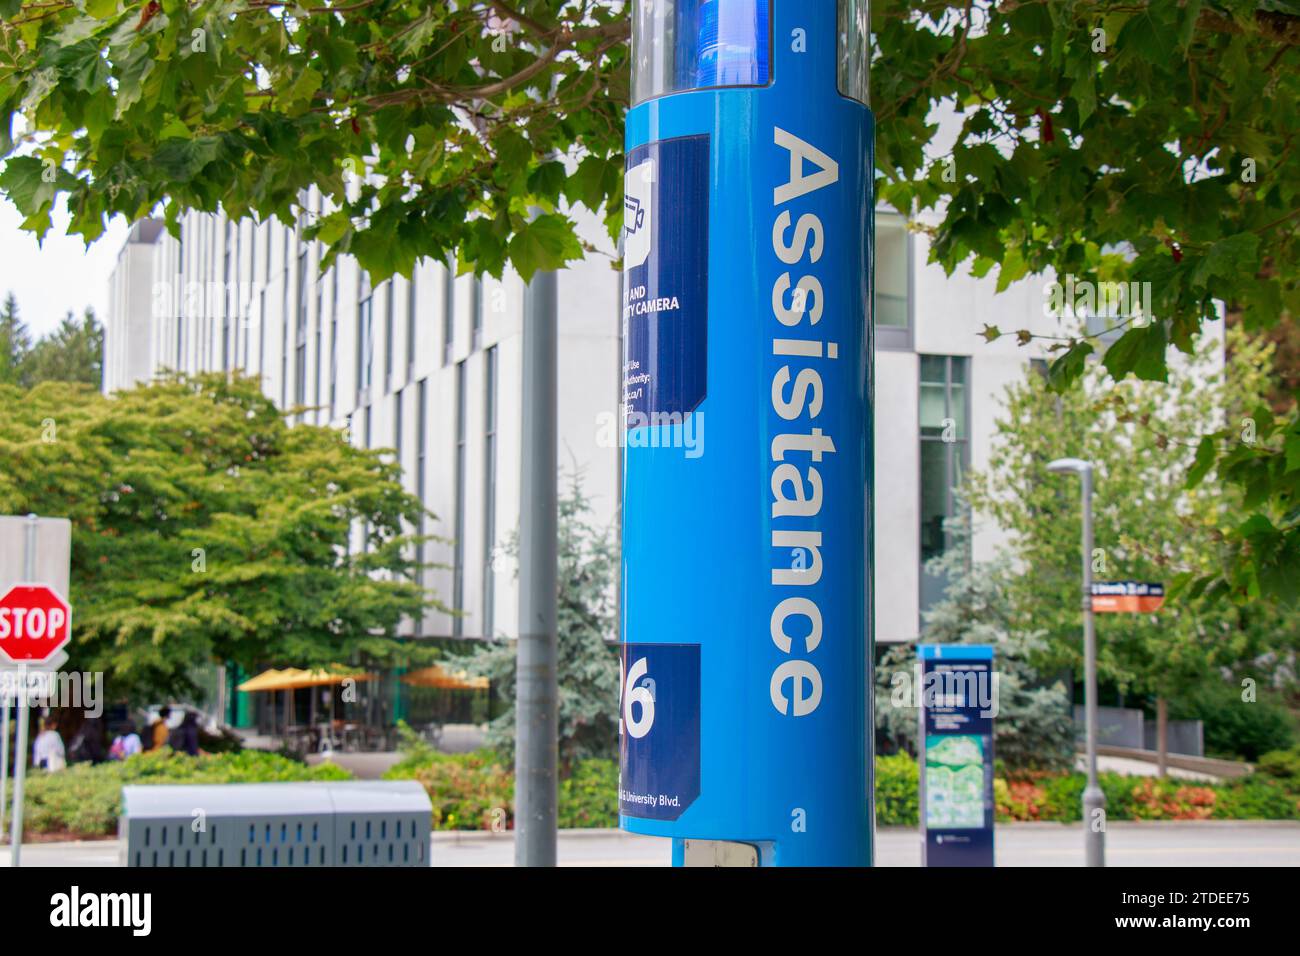 Vancouver, Canada - September 3,2021: The Emergency Blue Phones camera system on the UBC Vancouver Point Grey campus, consisting of blue pedestals wit Stock Photo